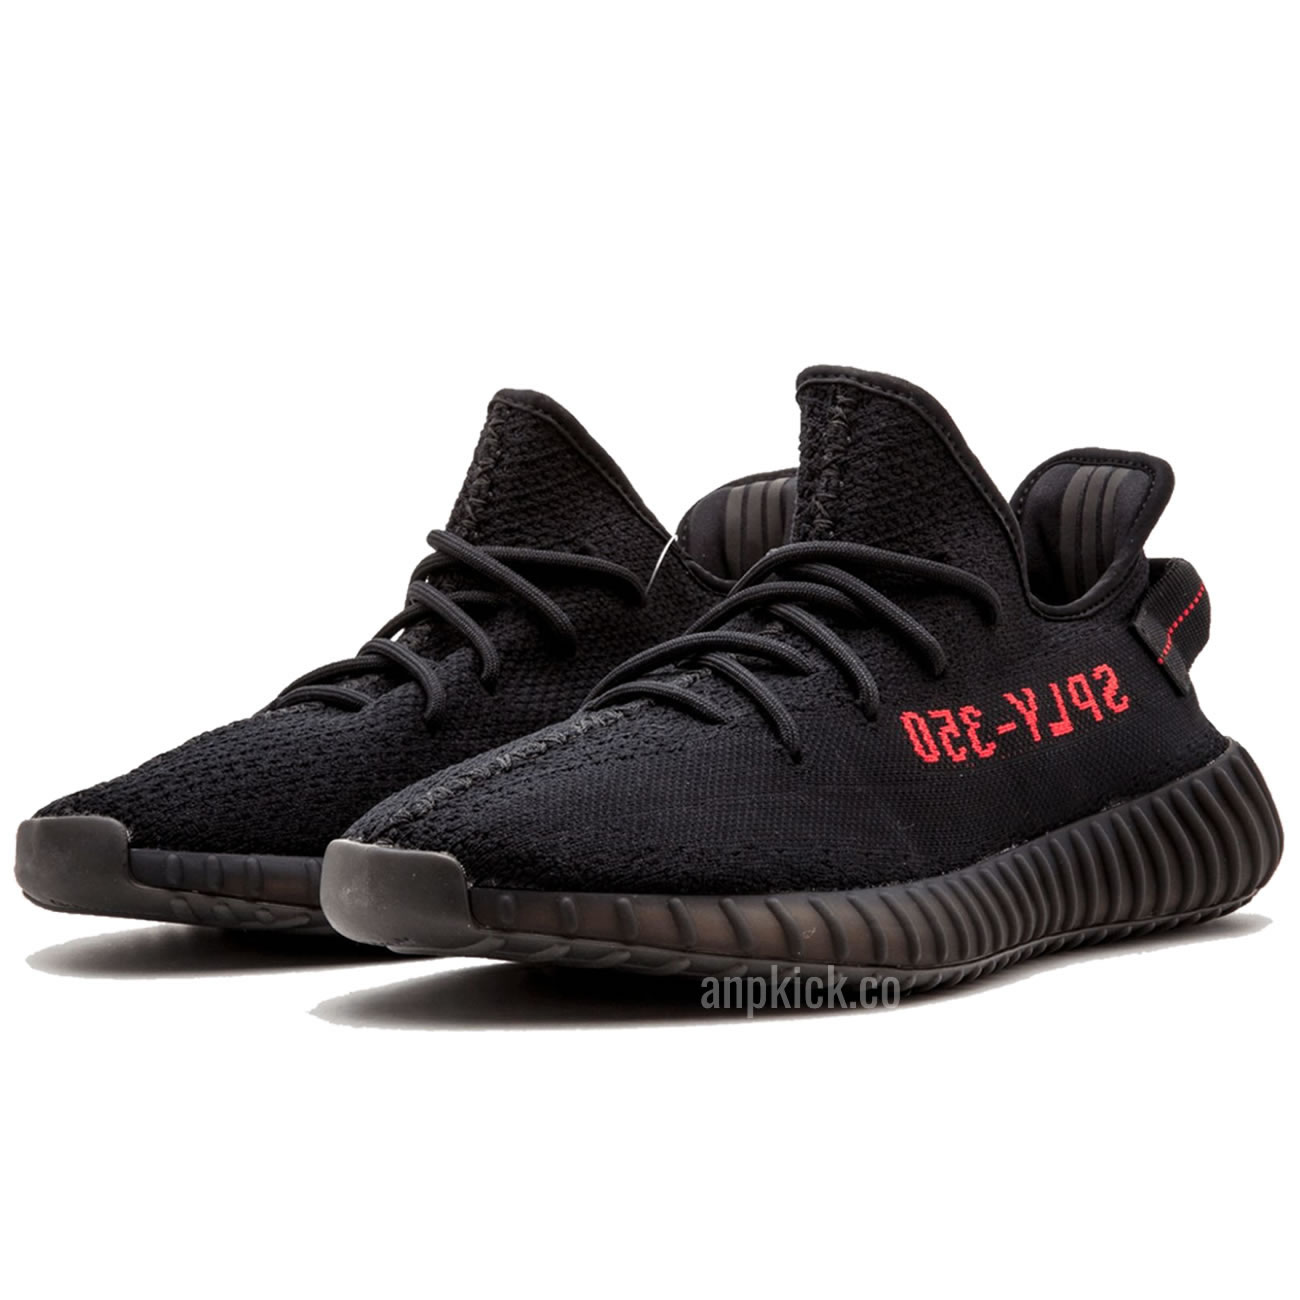 Yeezy Boost 350 V2 Bred Black Red 2020 New Release Cp9652 (2) - newkick.org